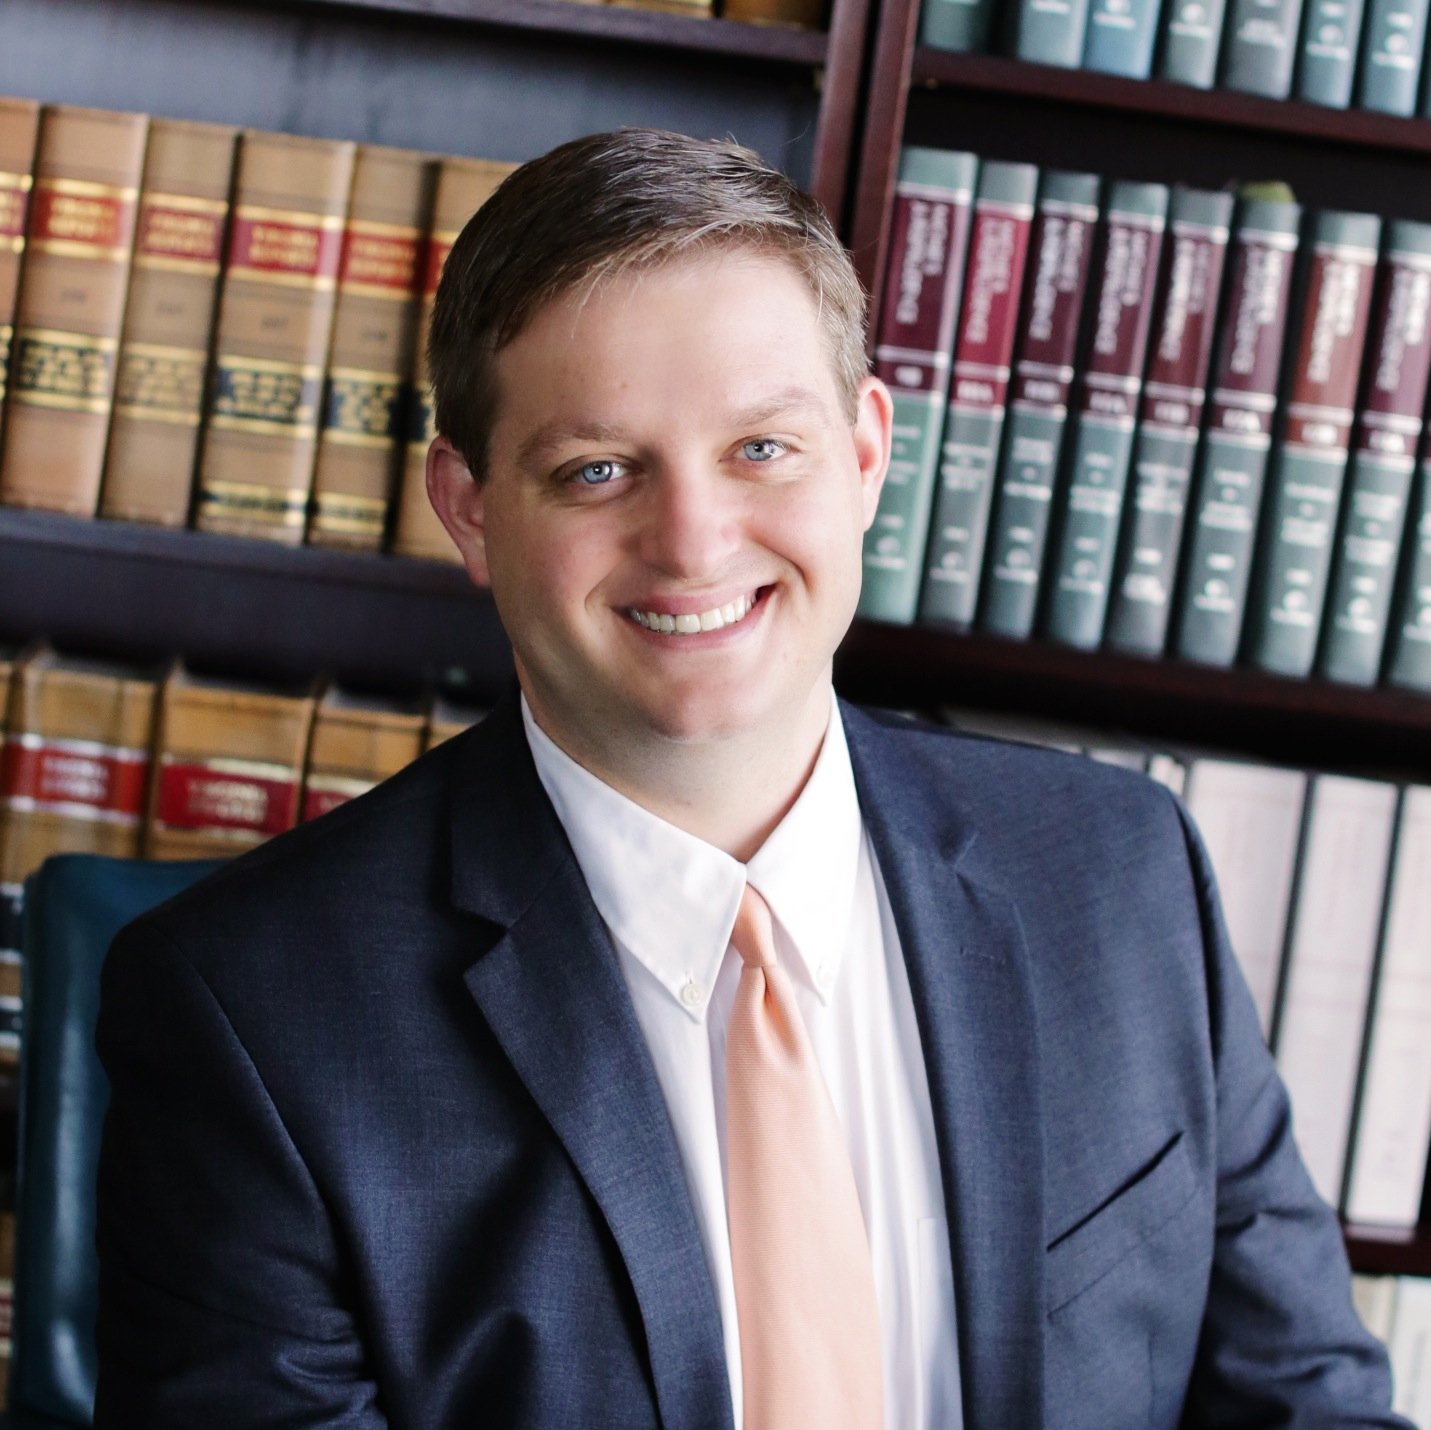 Personal injury attorney handling car accidents, medical malpractice, wrongful death cases, dog bites and other matters